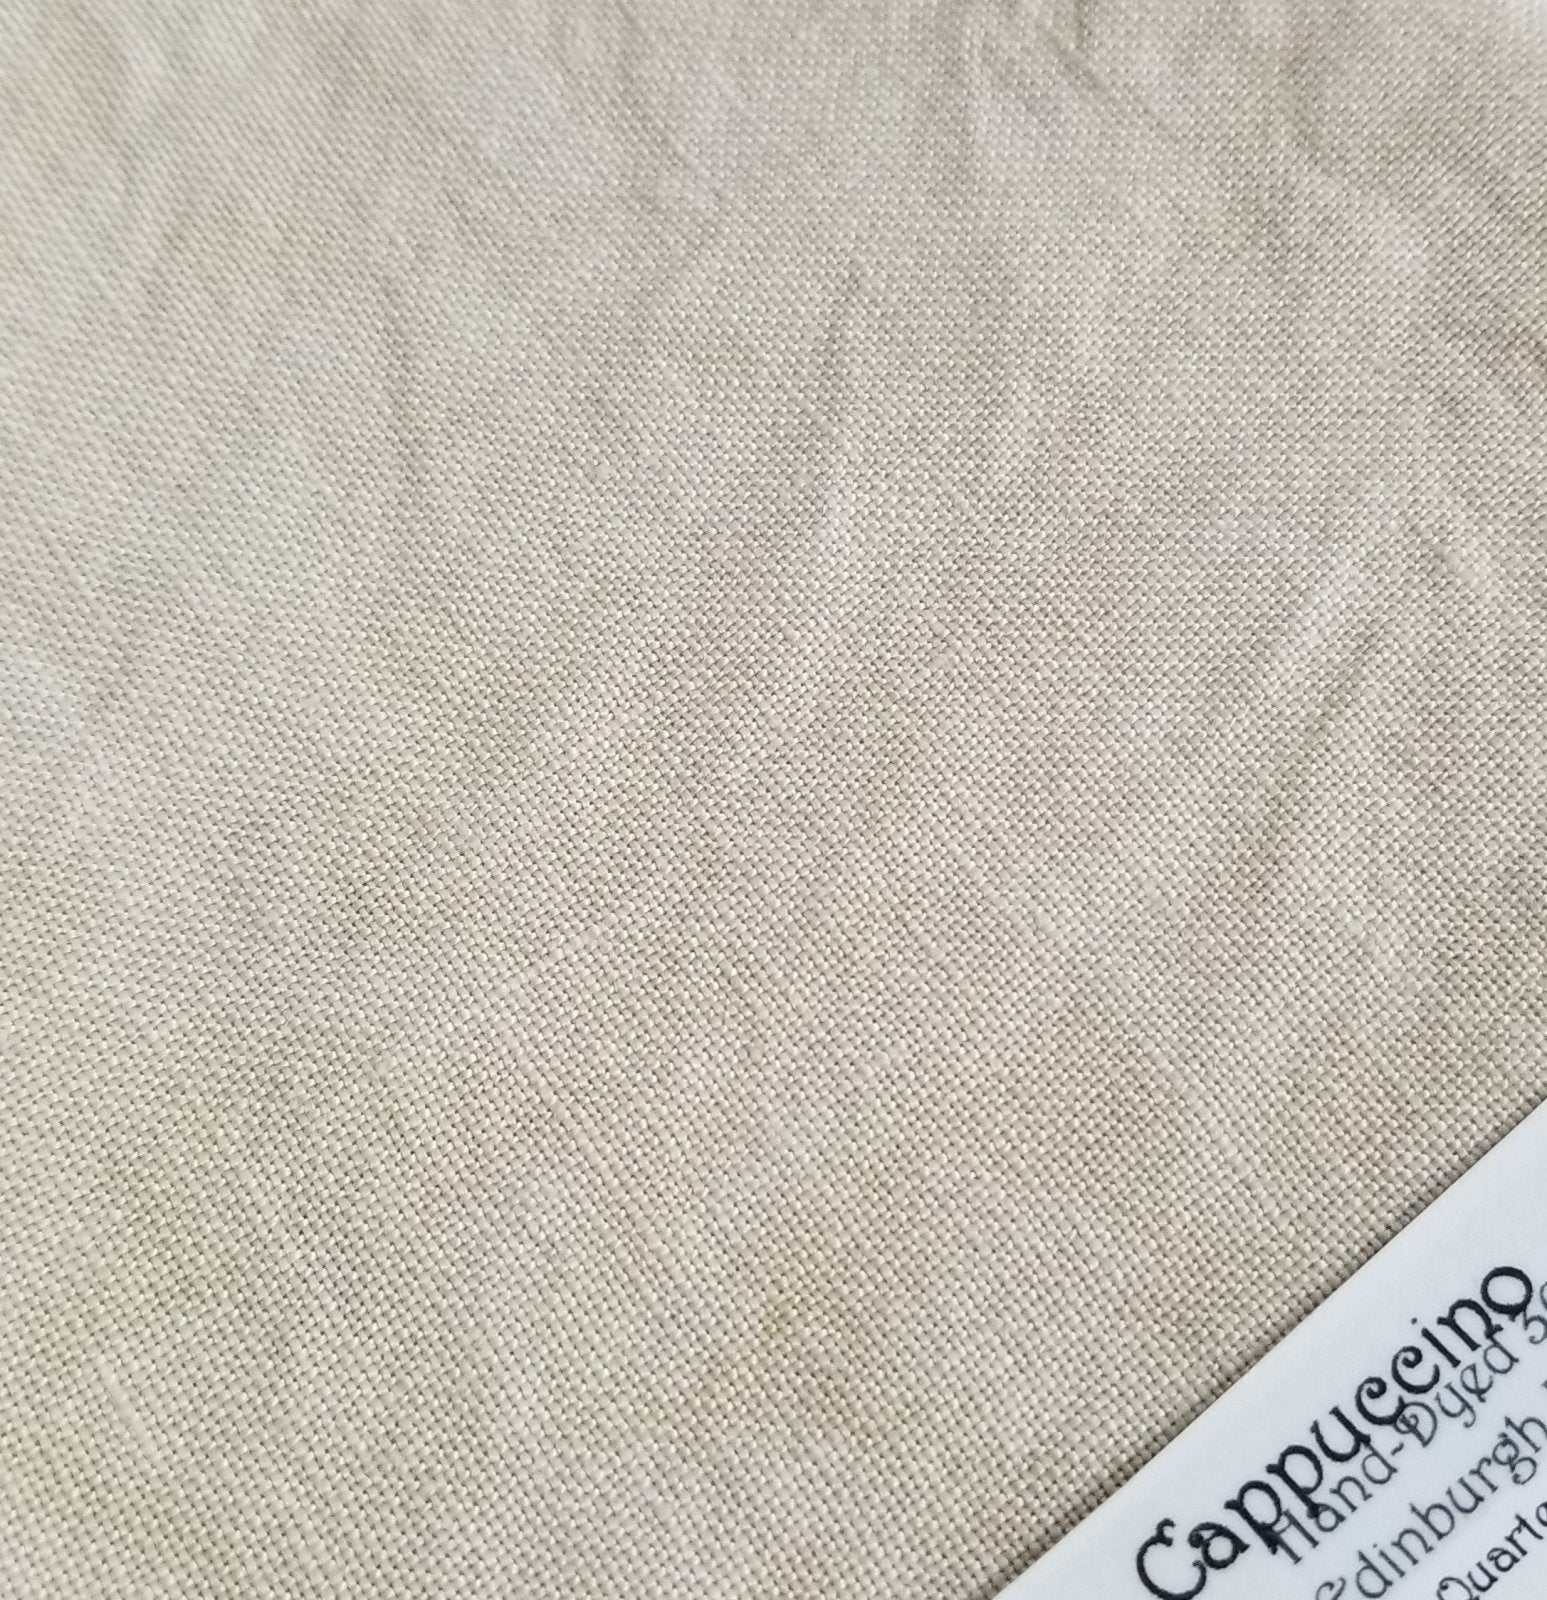 40 Count Linen - Cappuccino - Fiber on a Whim, Fabric, The Crafty Grimalkin - A Cross Stitch Store